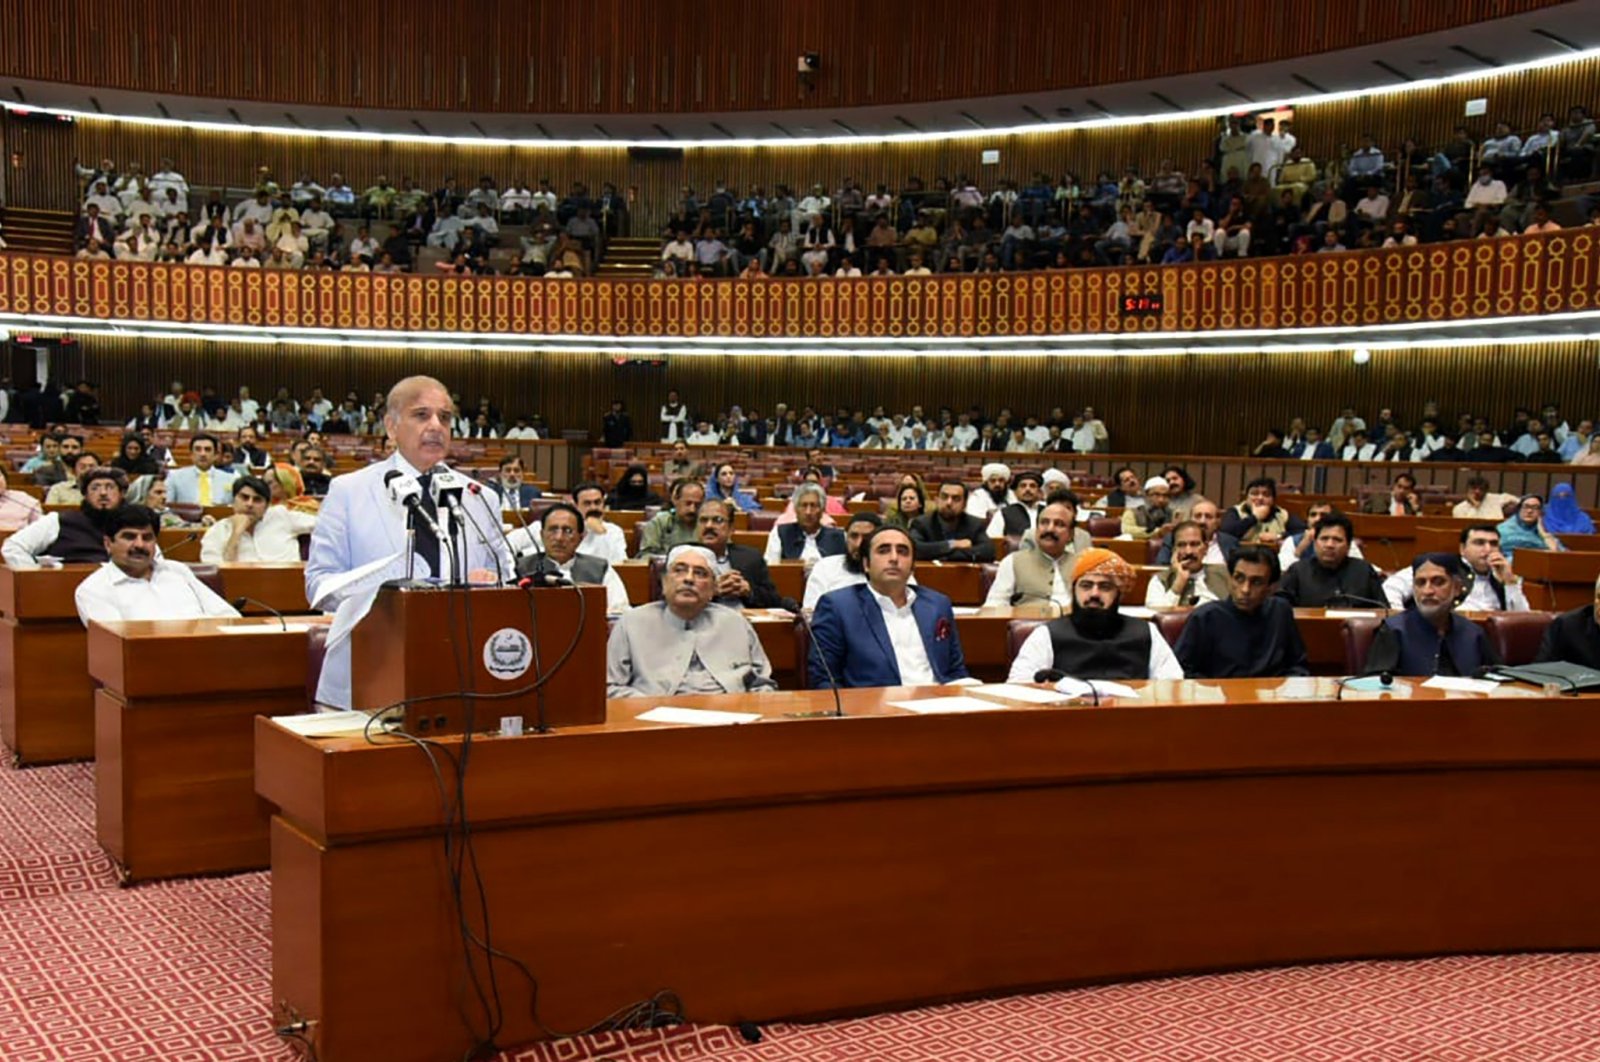 Newly elected Pakistani Prime Minister Shahbaz Sharif addresses the National Assembly session, Islamabad, Pakistan, April 11, 2022. (AP Photo)